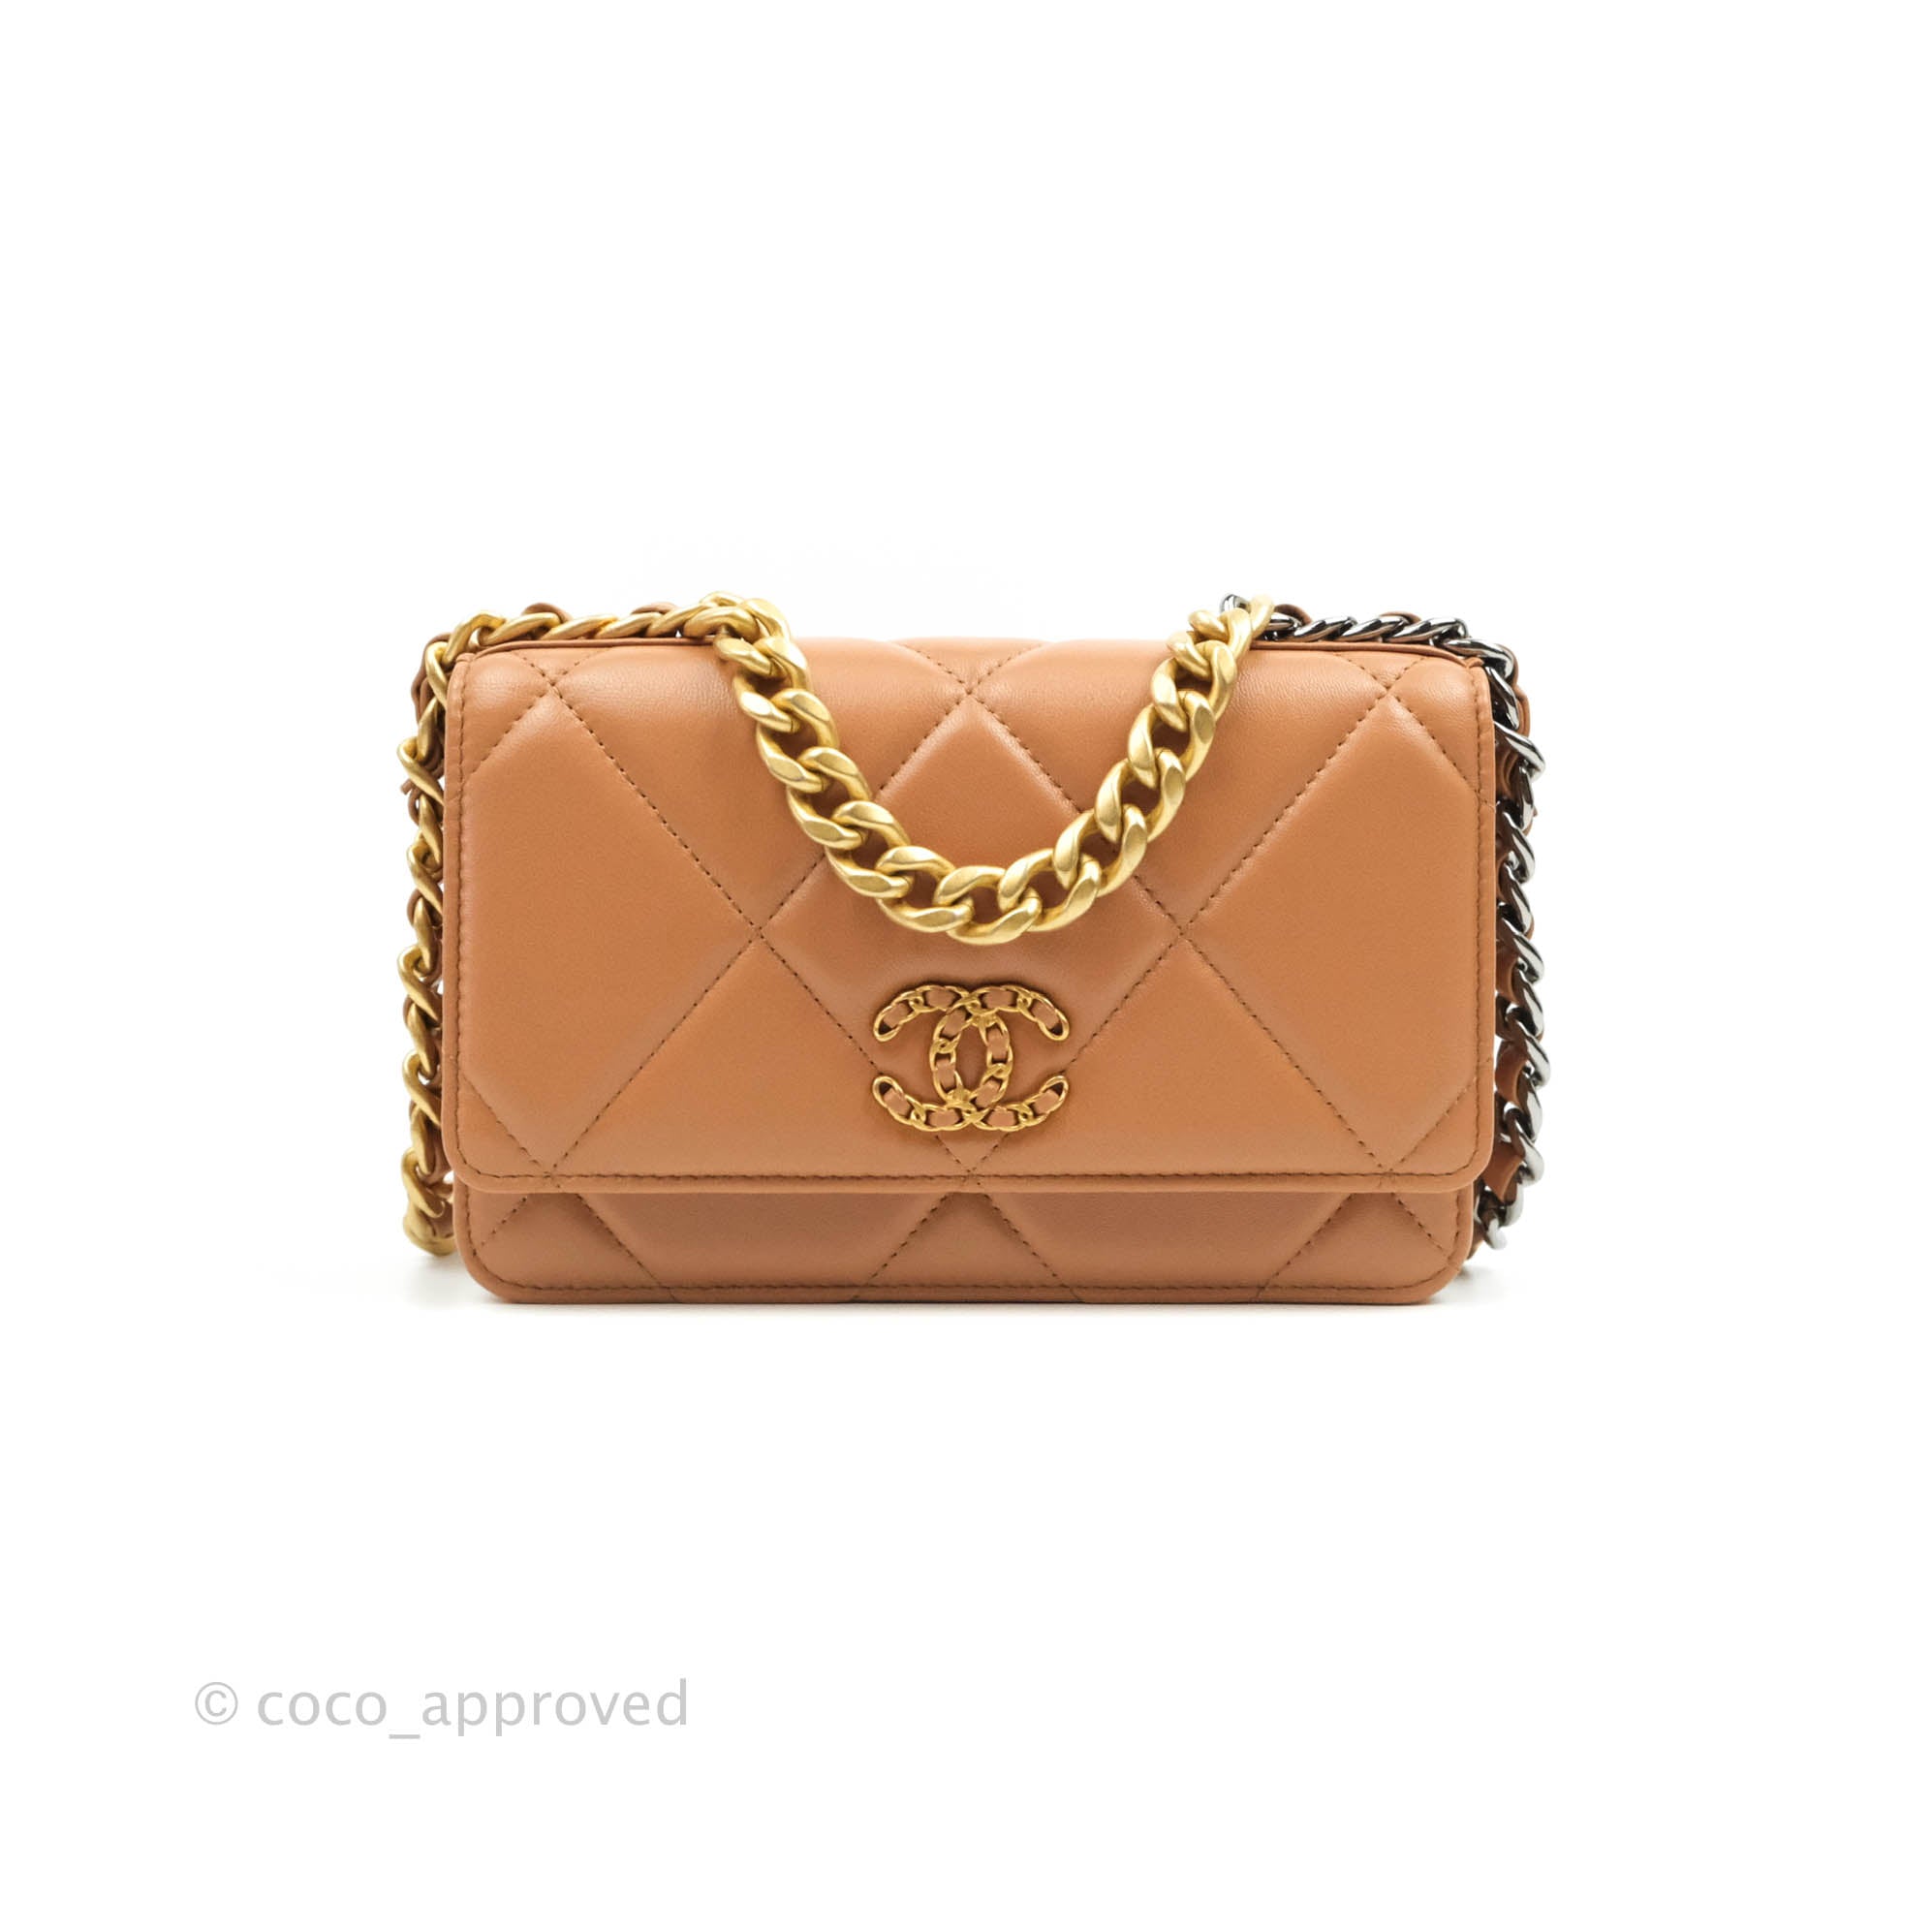 CHANEL Classic Flap Brown Bags & Handbags for Women for sale